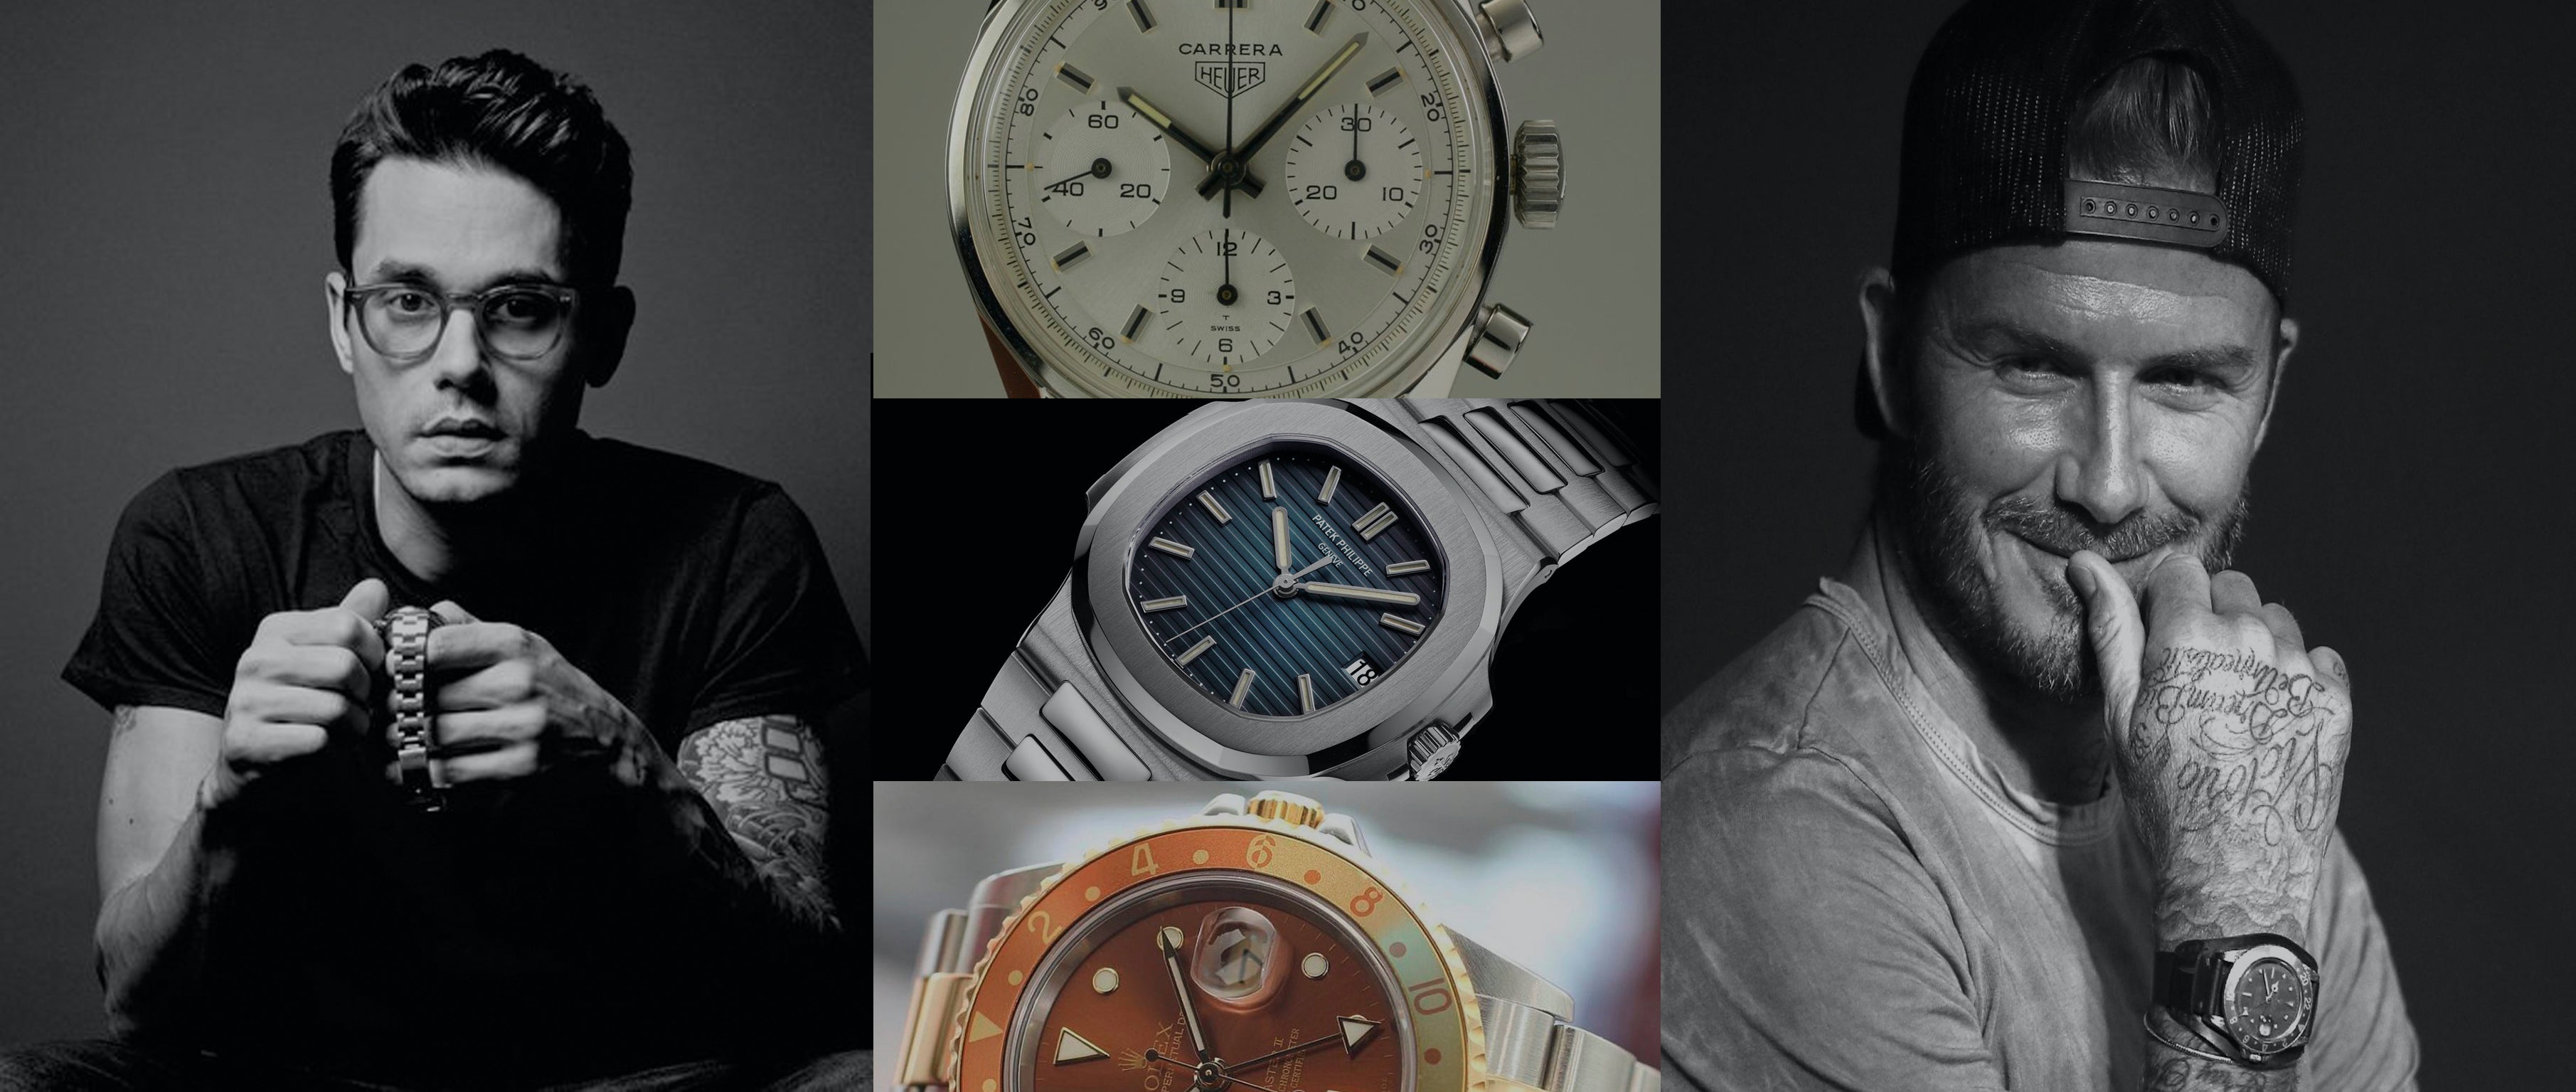 Celebrities And Their Vintage Watch Collections - Who Has The Best Taste? -  Ashton-Blakey Vintage Watches